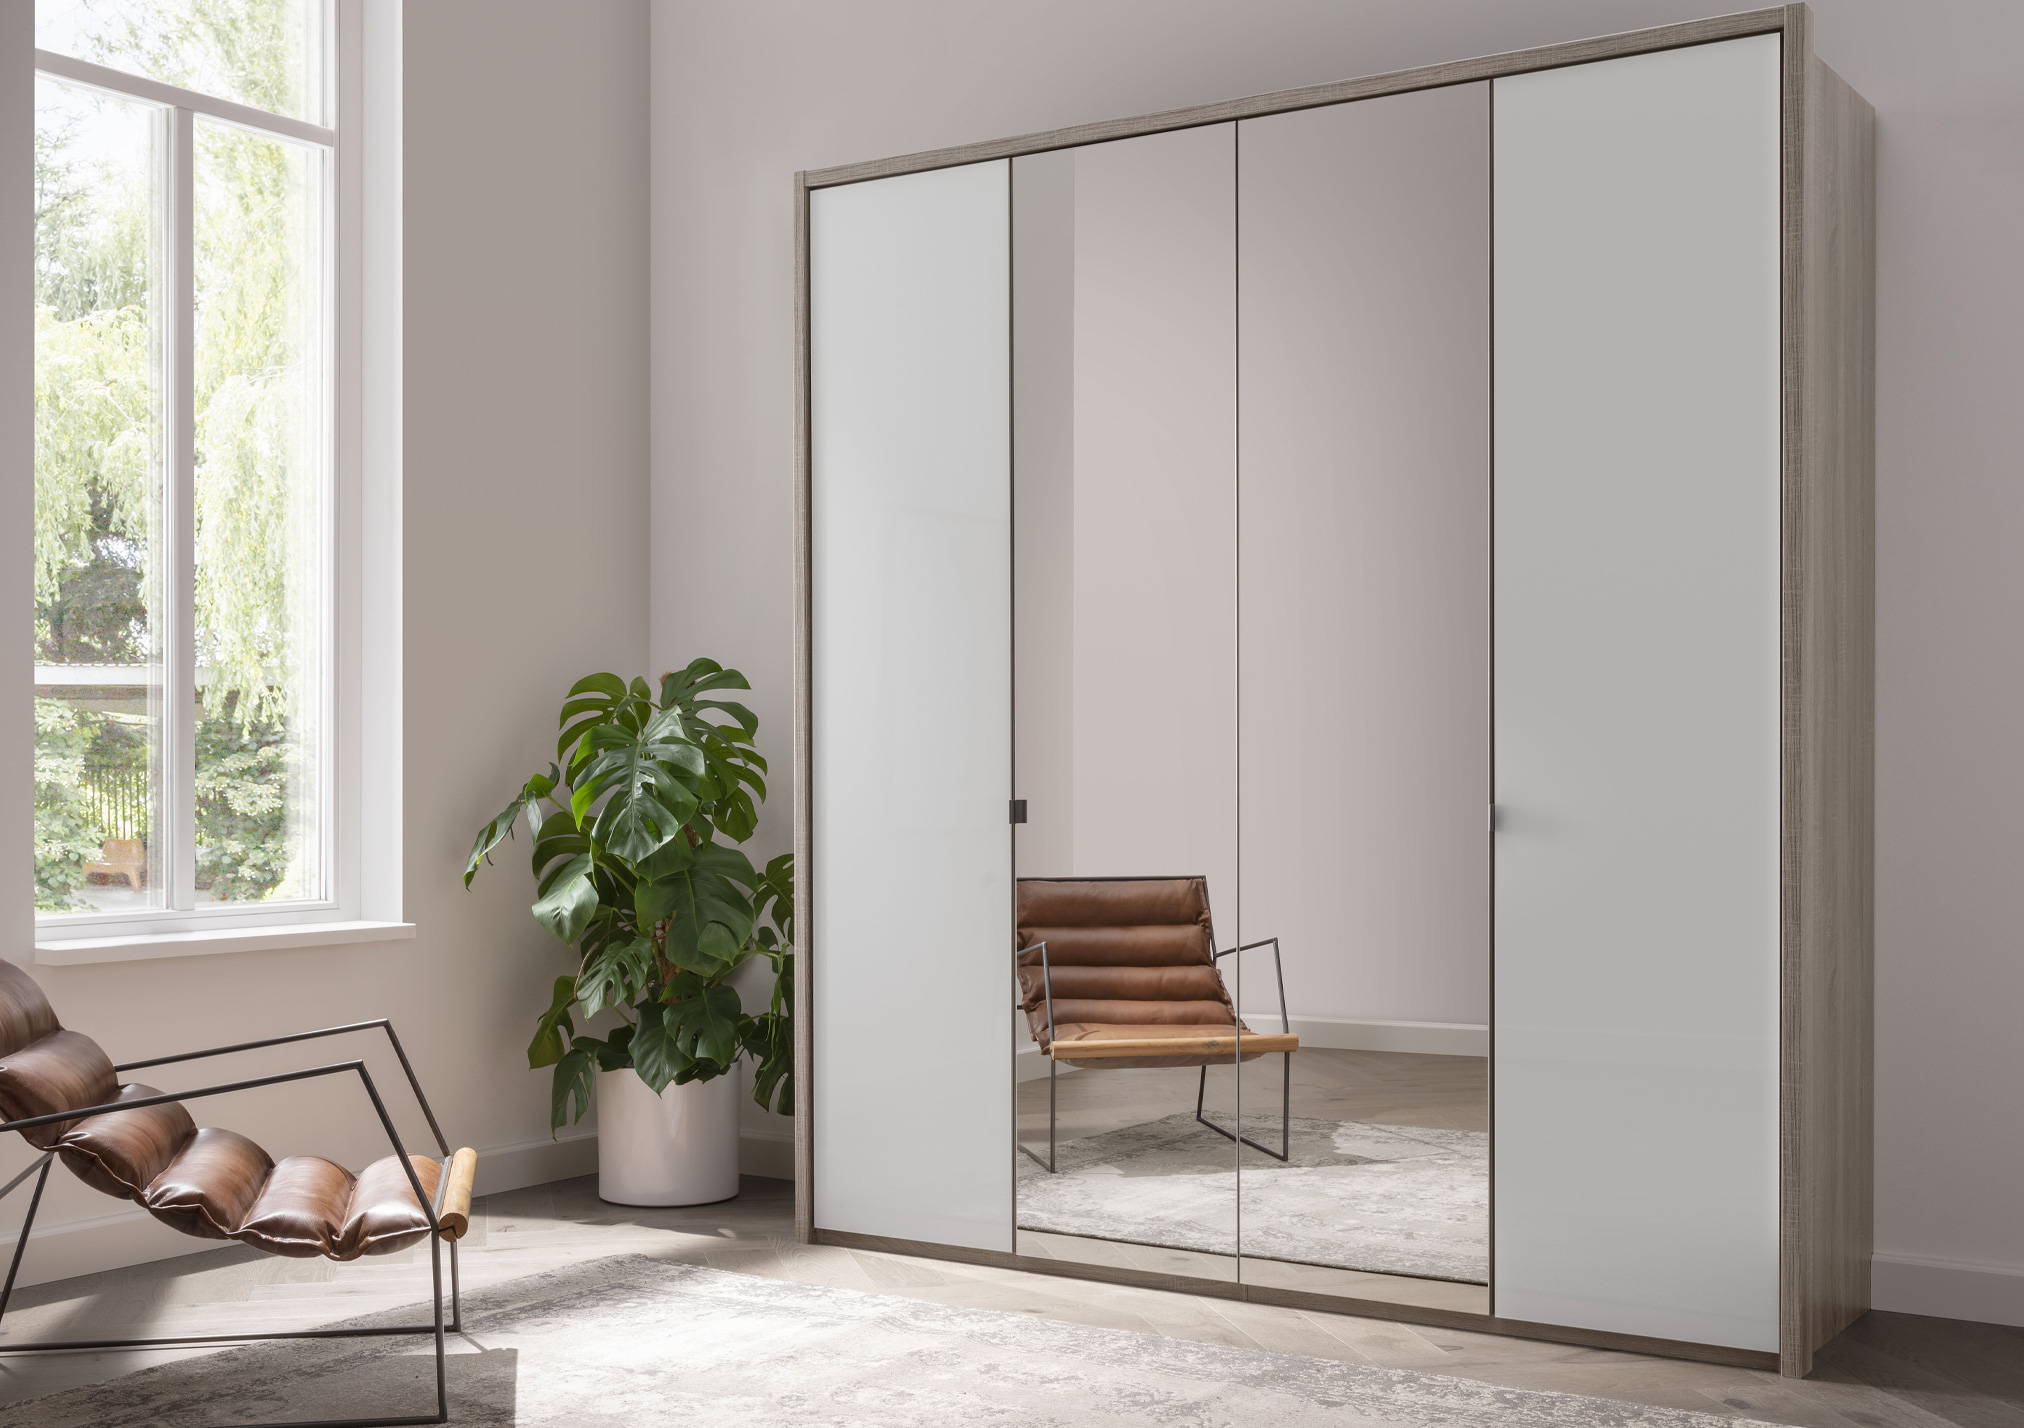 Shop Our Robes Barcelona Collection & Choose Mirrored Or Plain Door Wardrobes